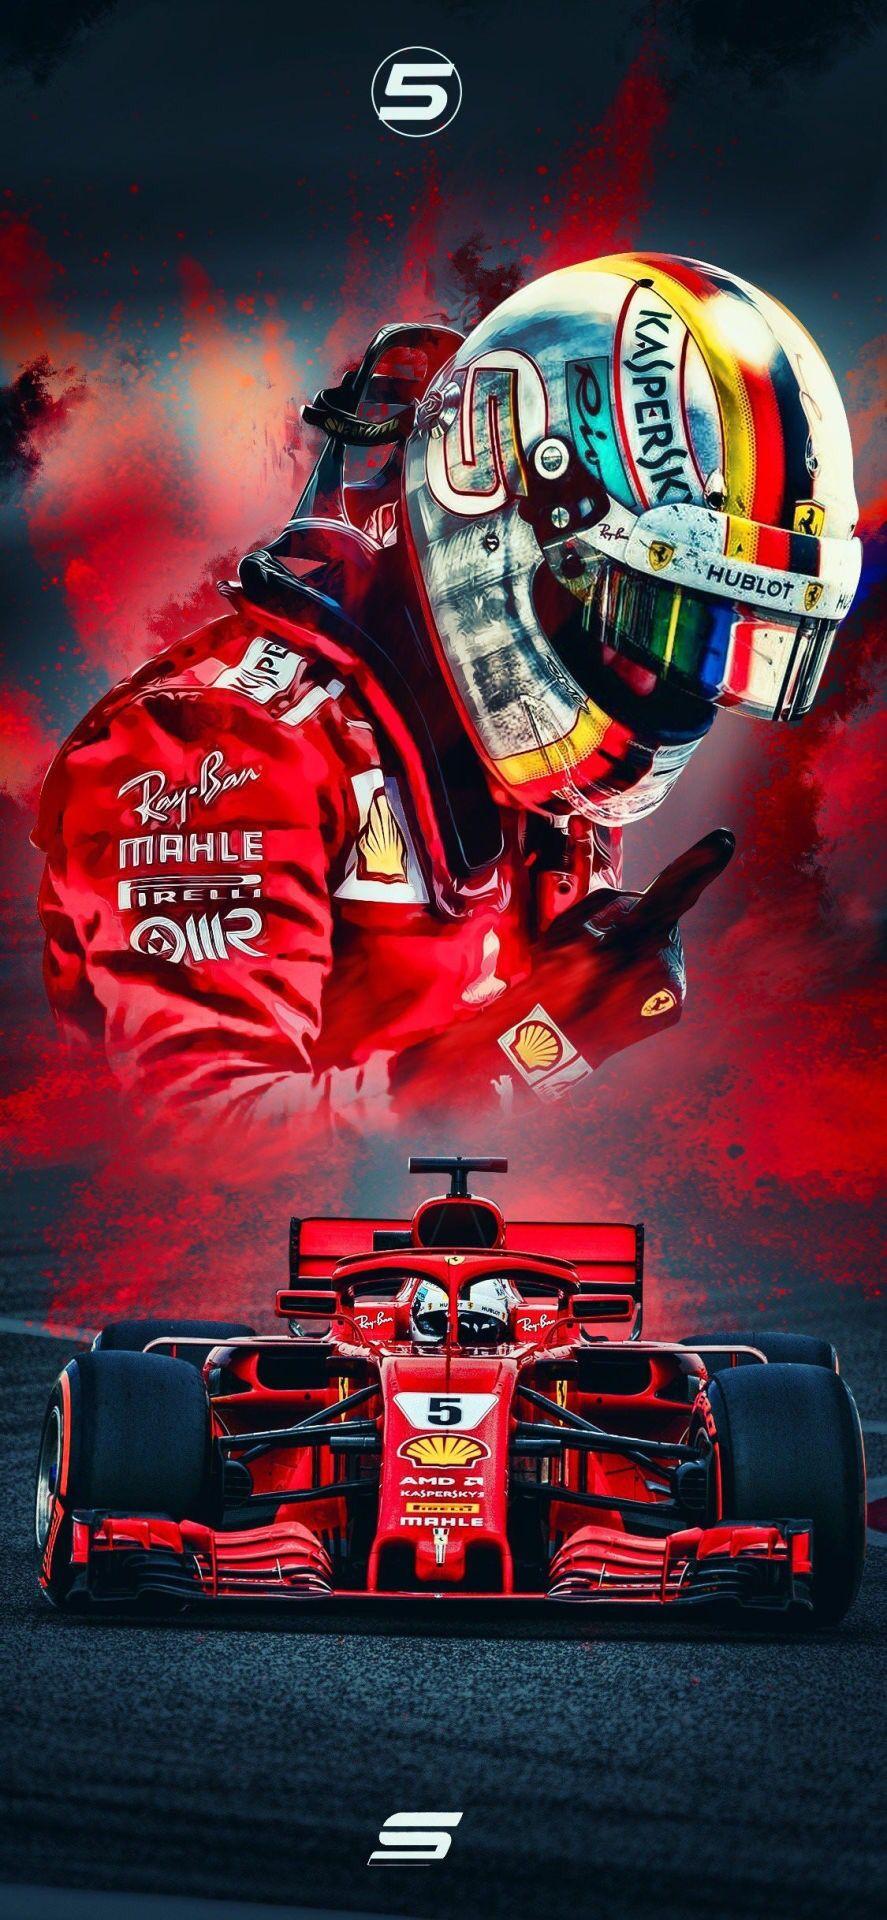 iphone x f1 2019 backgrounds